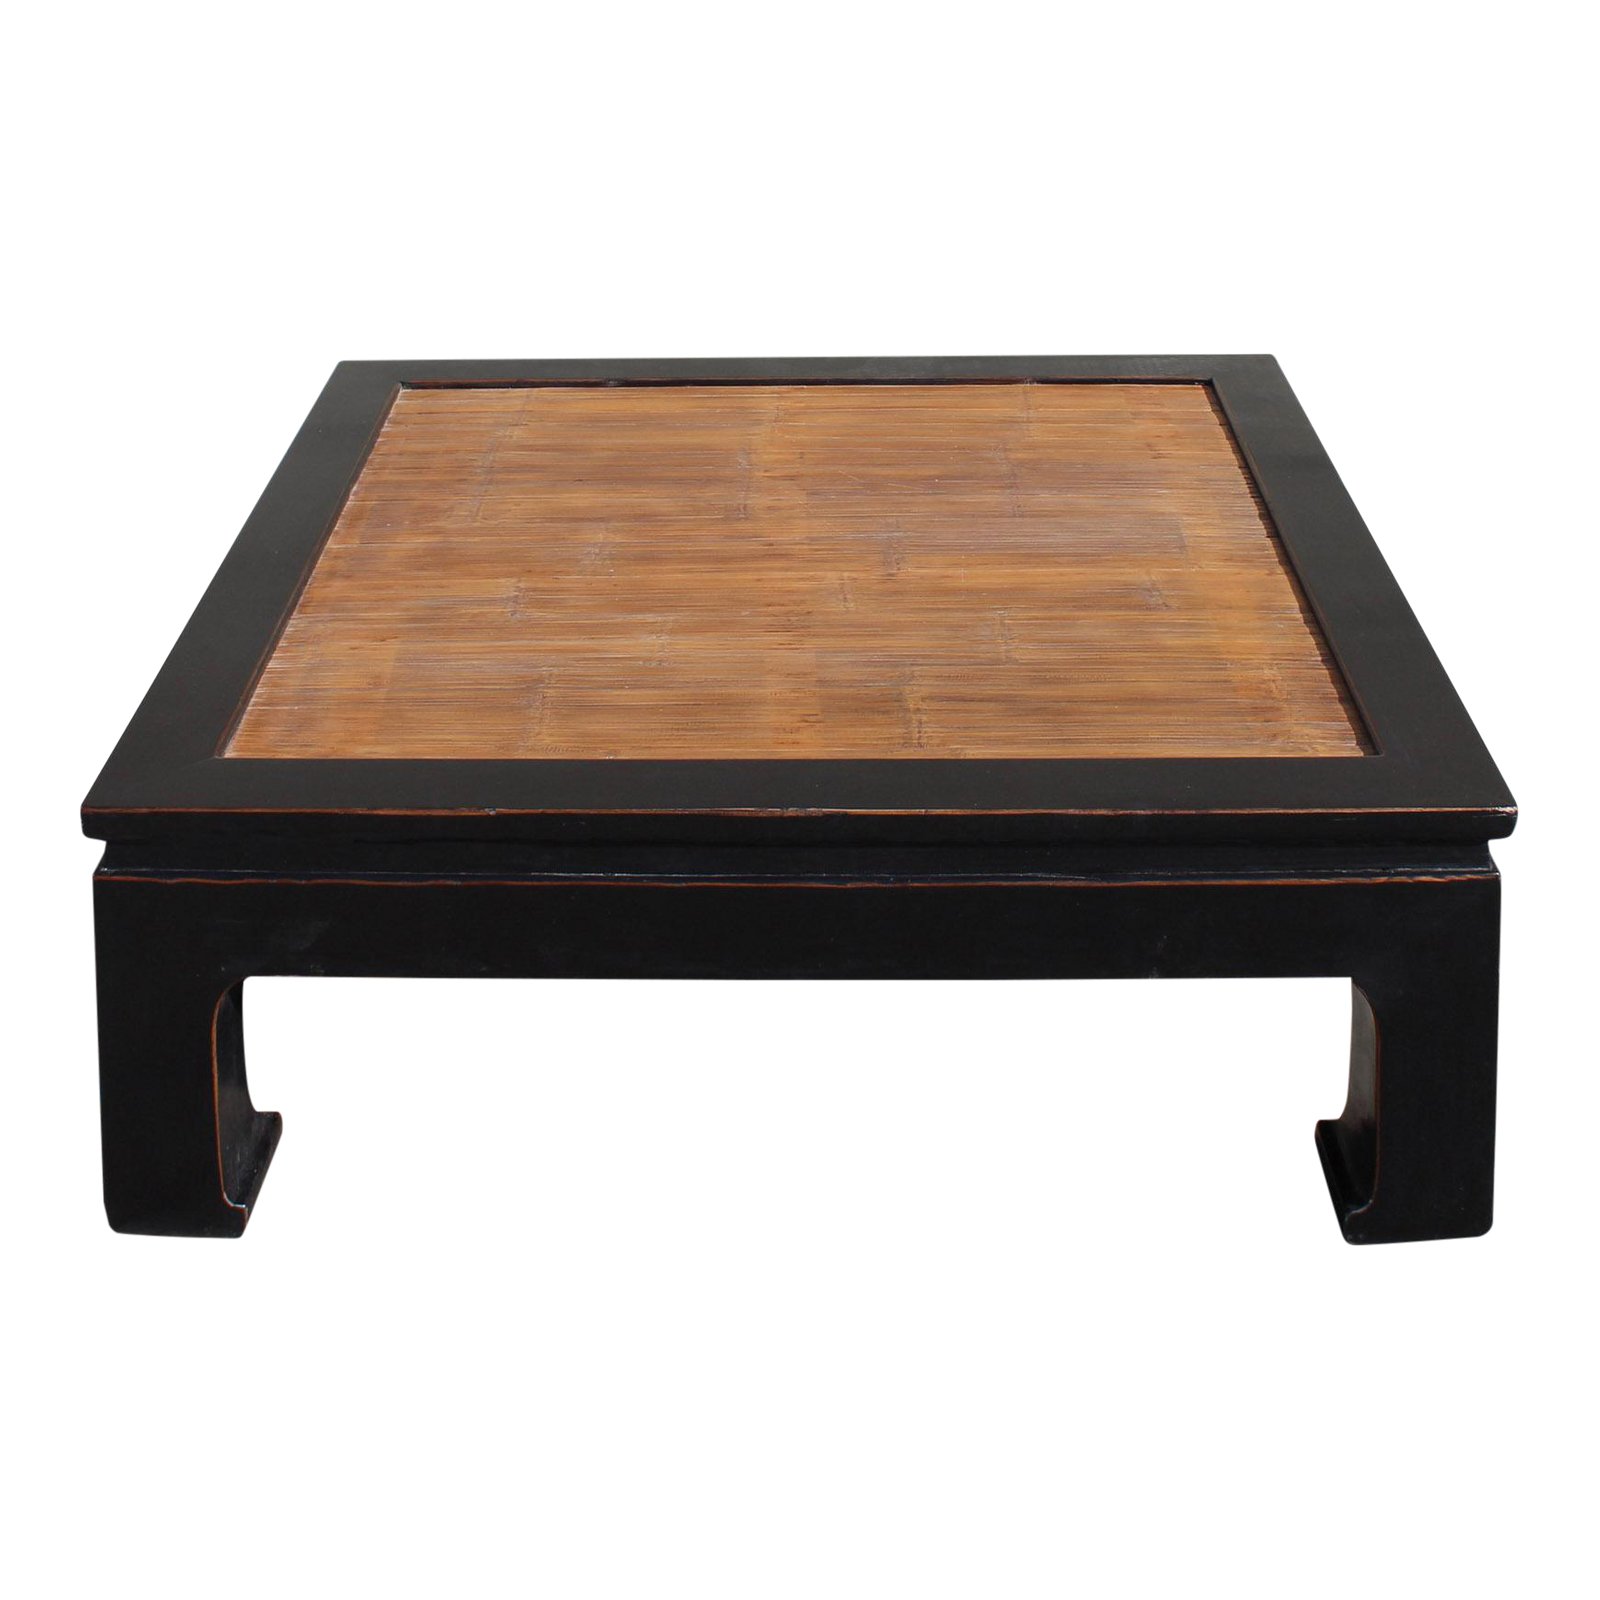 black lacquer brown bamboo strip top square curved legs coffee table accent chairish ideas inch high end navy blue counter height island kidney bean retro modern wooden designs